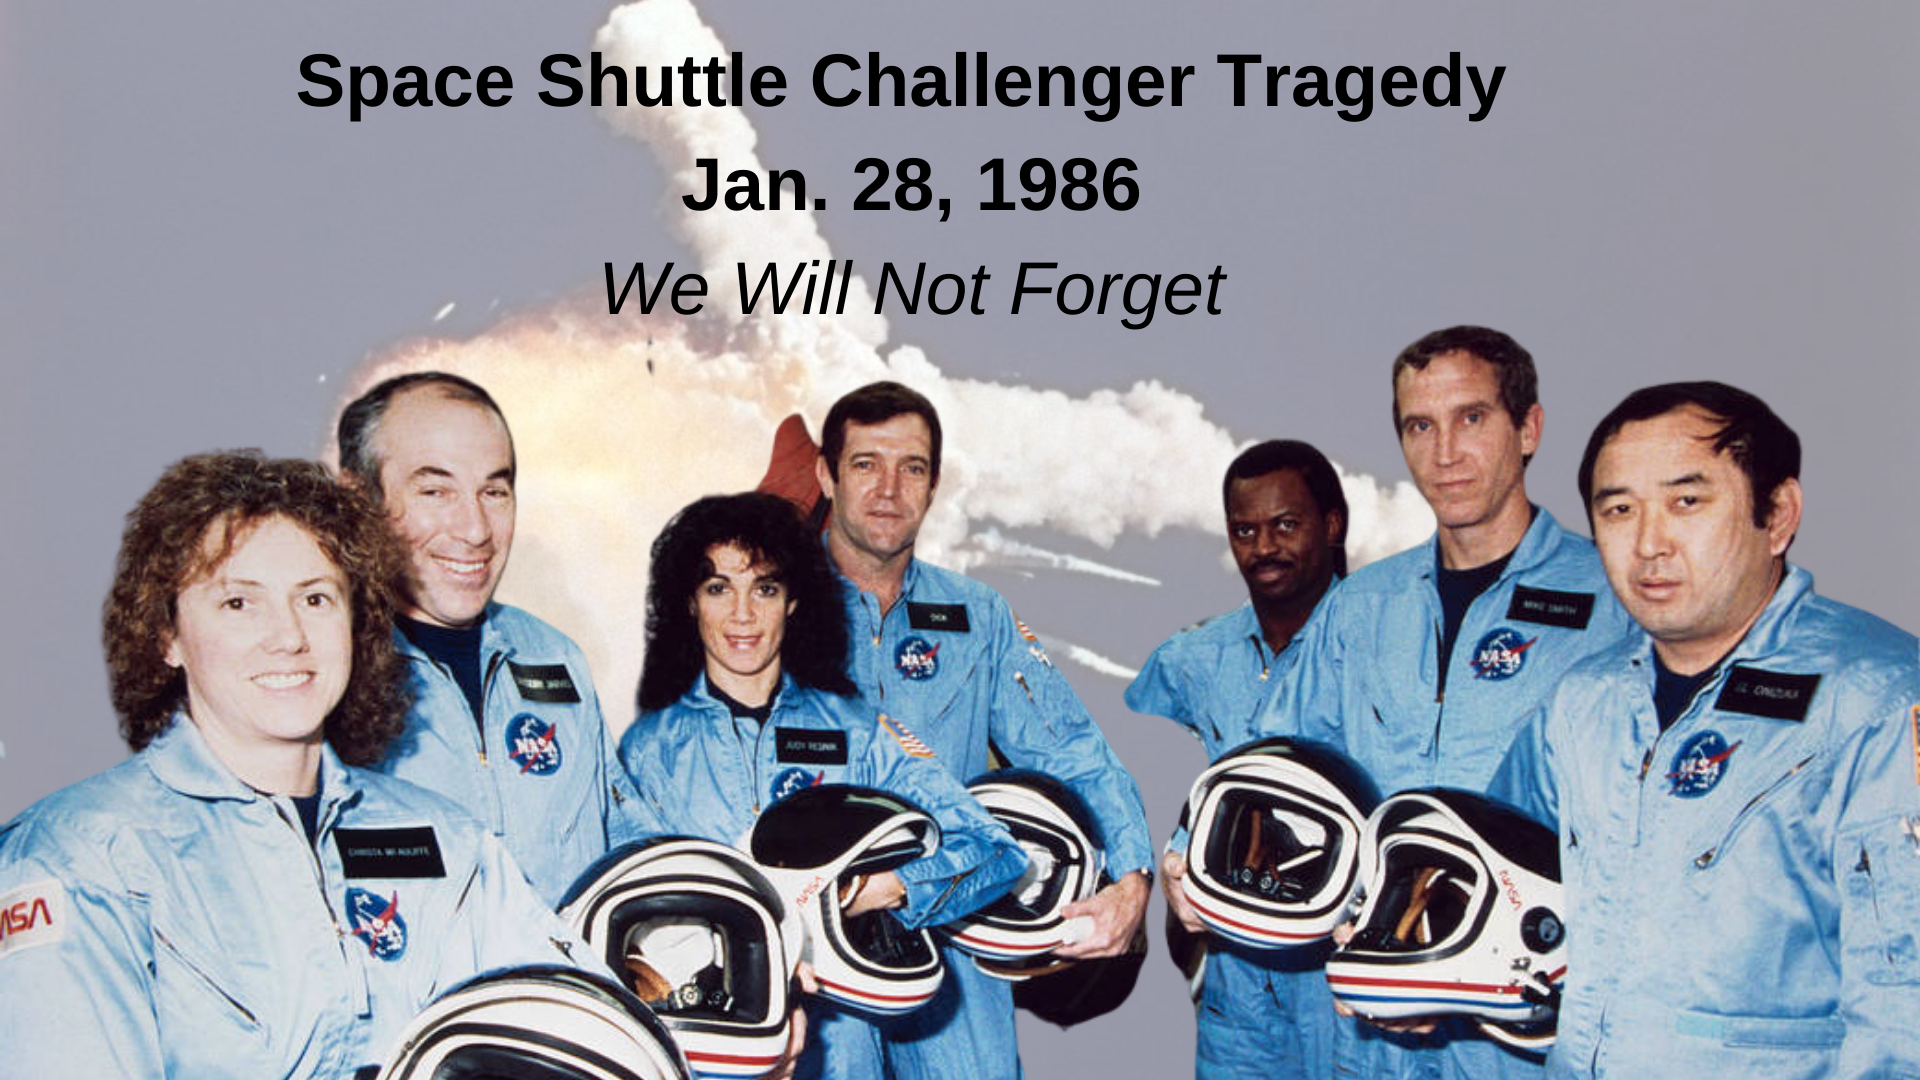 36 years ago NASA lost 7 astronauts when Challenger exploded